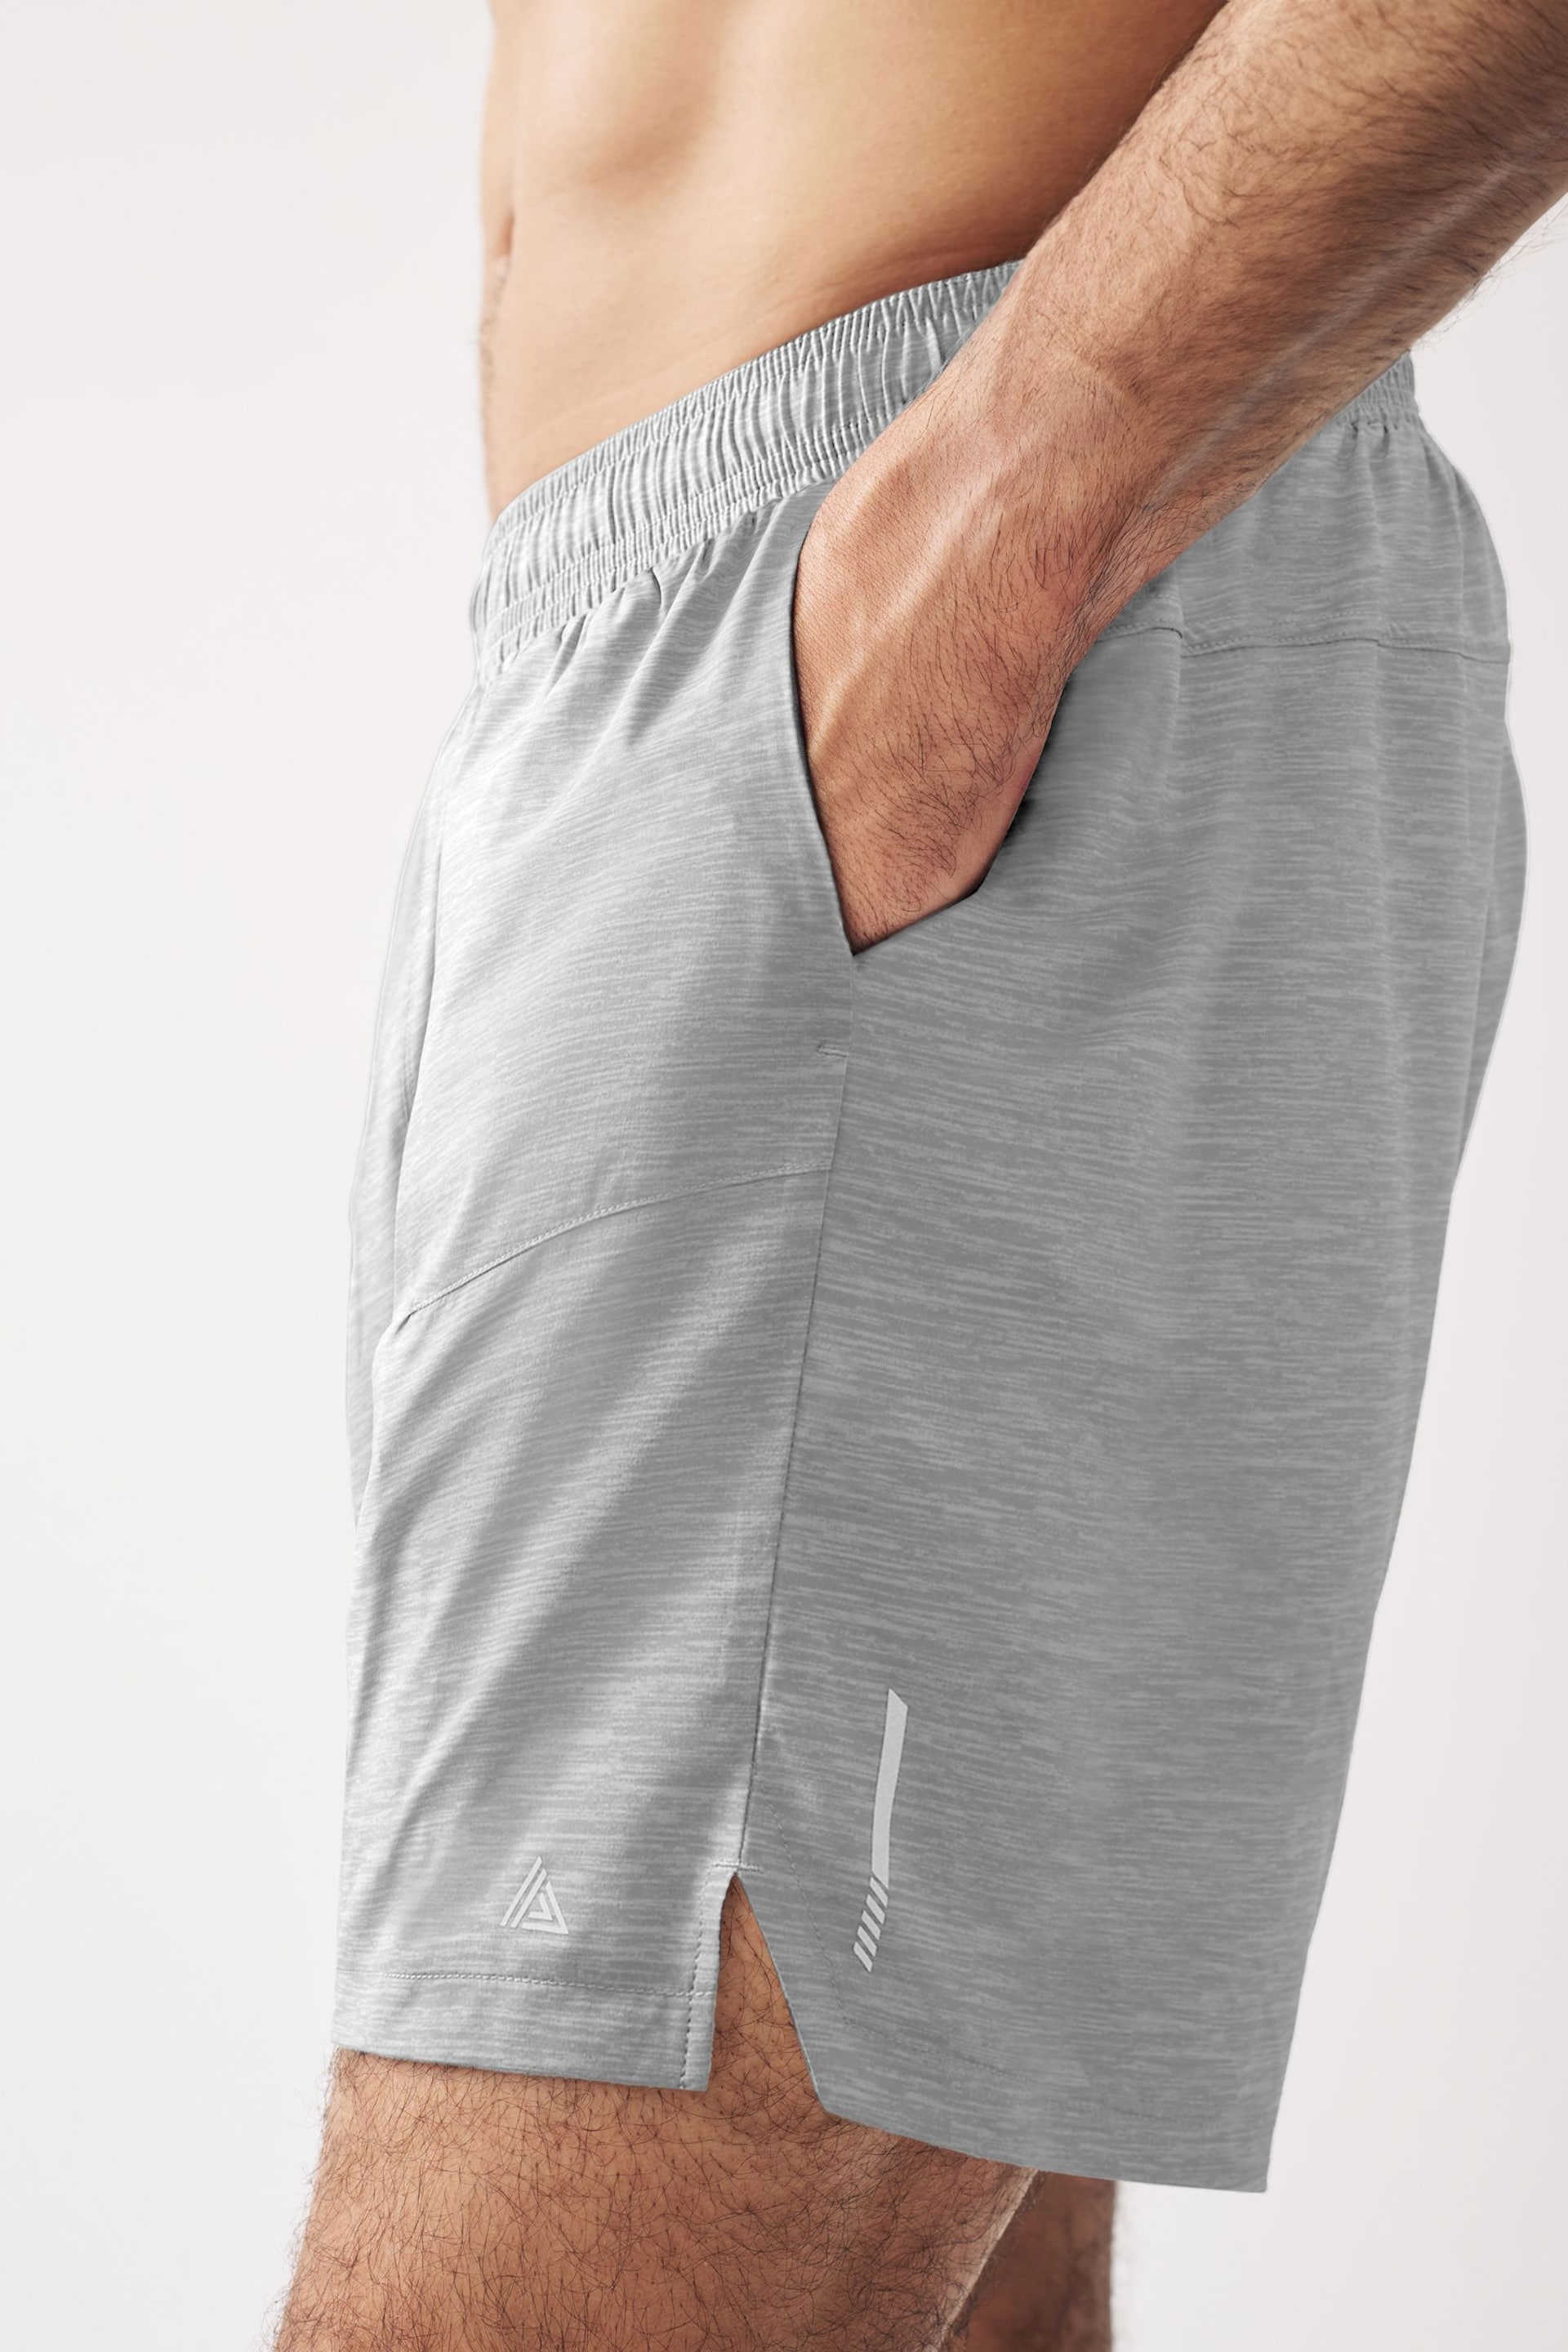 Grey 7 Inch Active Gym Sports Shorts - Image 1 of 10